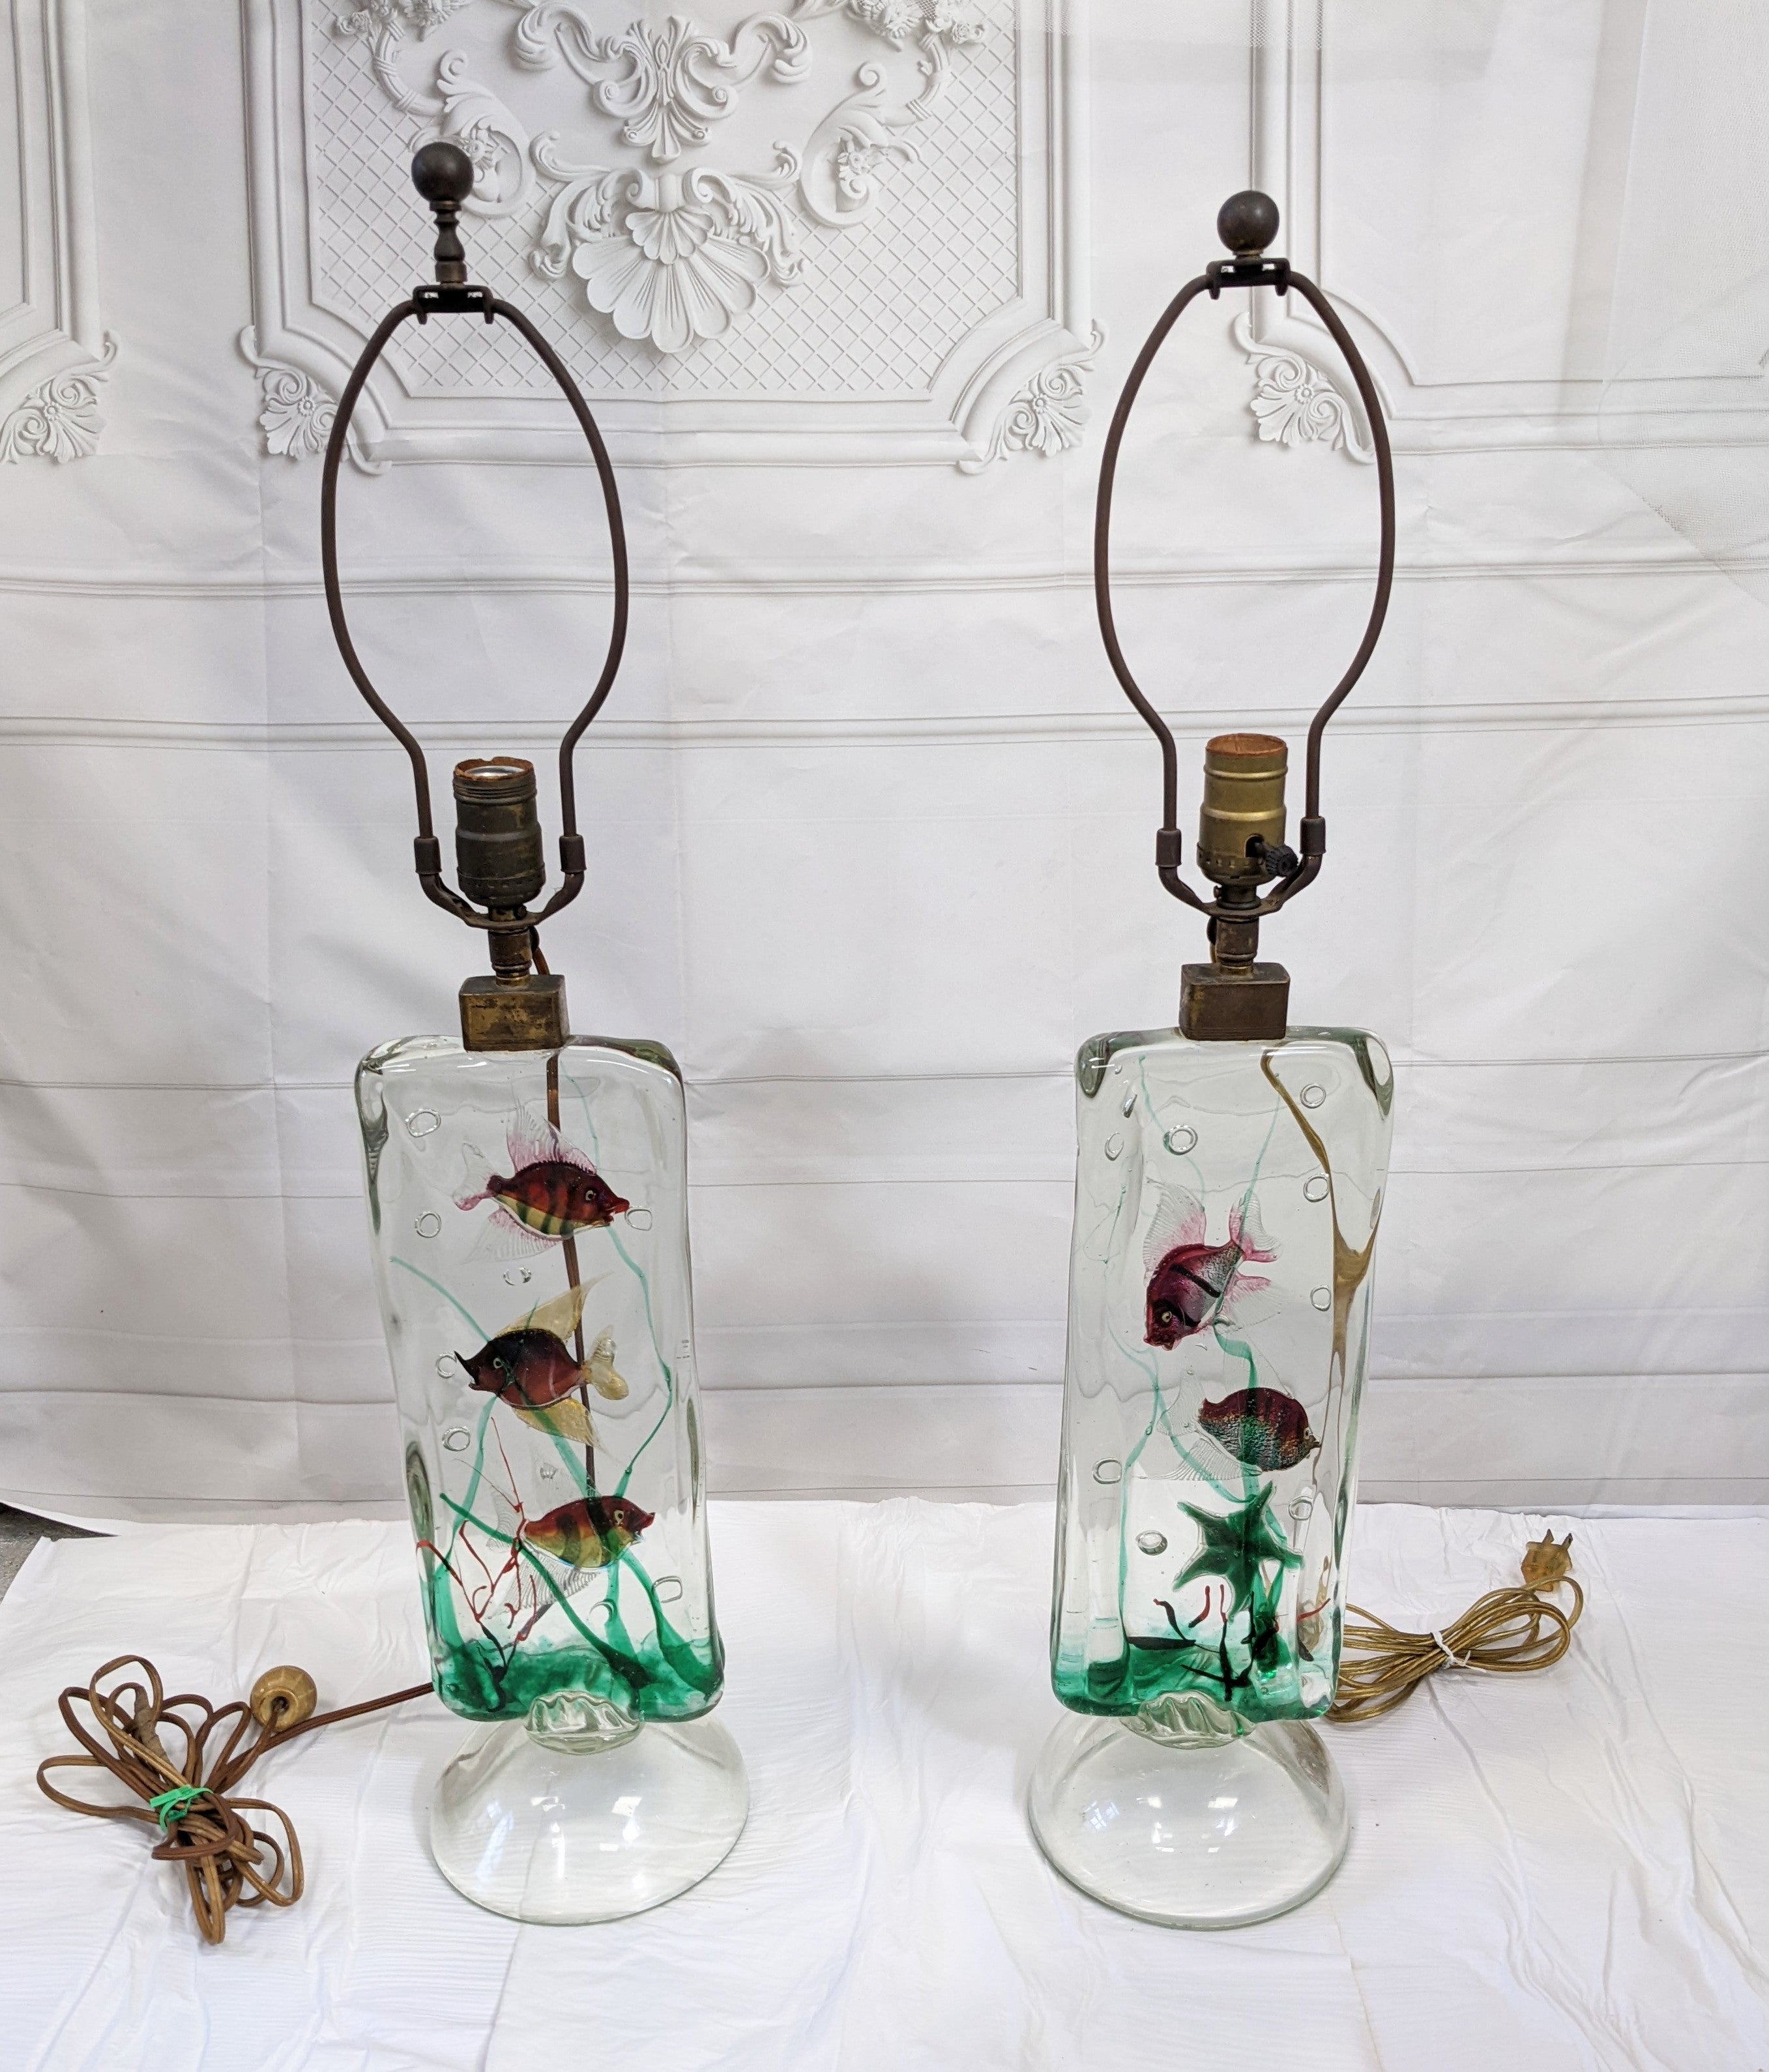 Exceptional and rare pair of Alfredo Barbini for Cenedese Aquarium lamps with original linen shades. One lamp has 3 fish in seascape and the other has 2 fish and a starfish. Original wiring. 1950's Italy.
Total Assembled Height with shades 29.5